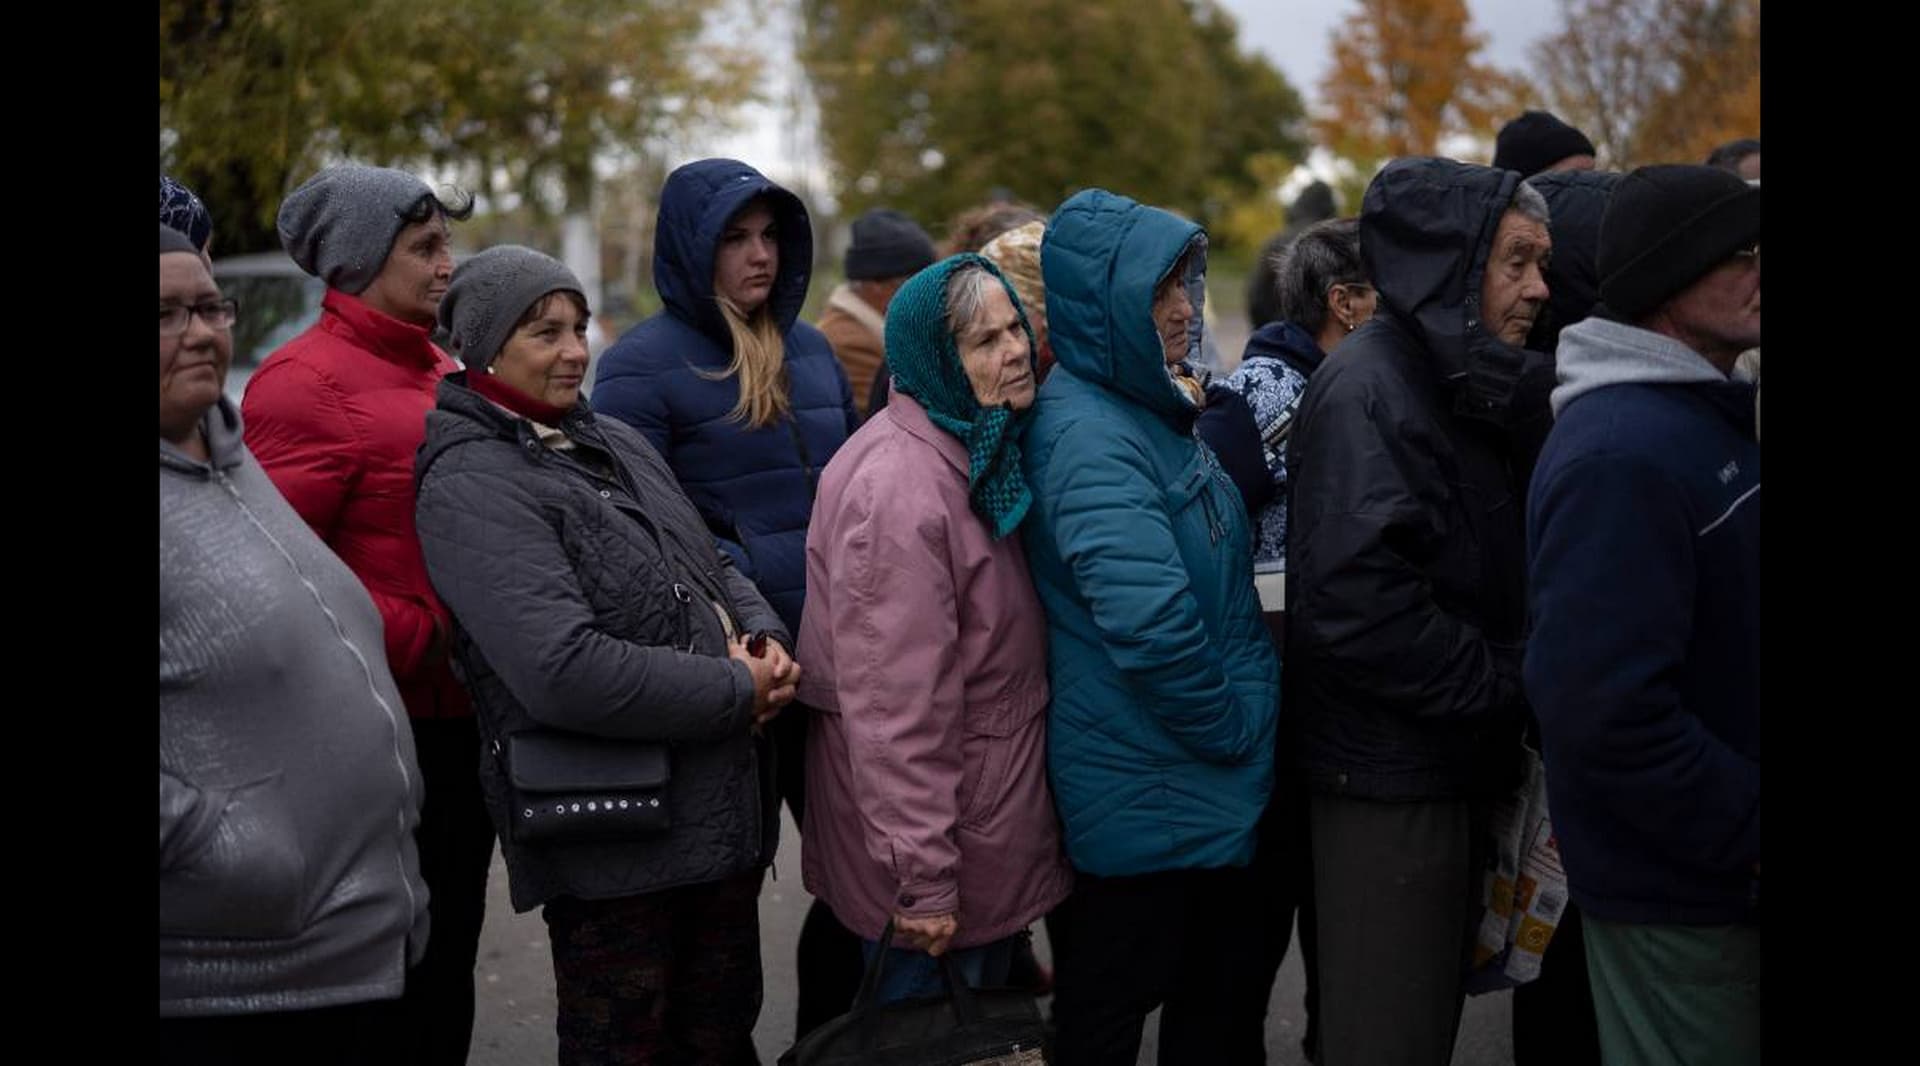 People wait in line as humanitarian aid is distributed at the village of Mykhailo Lukasheve